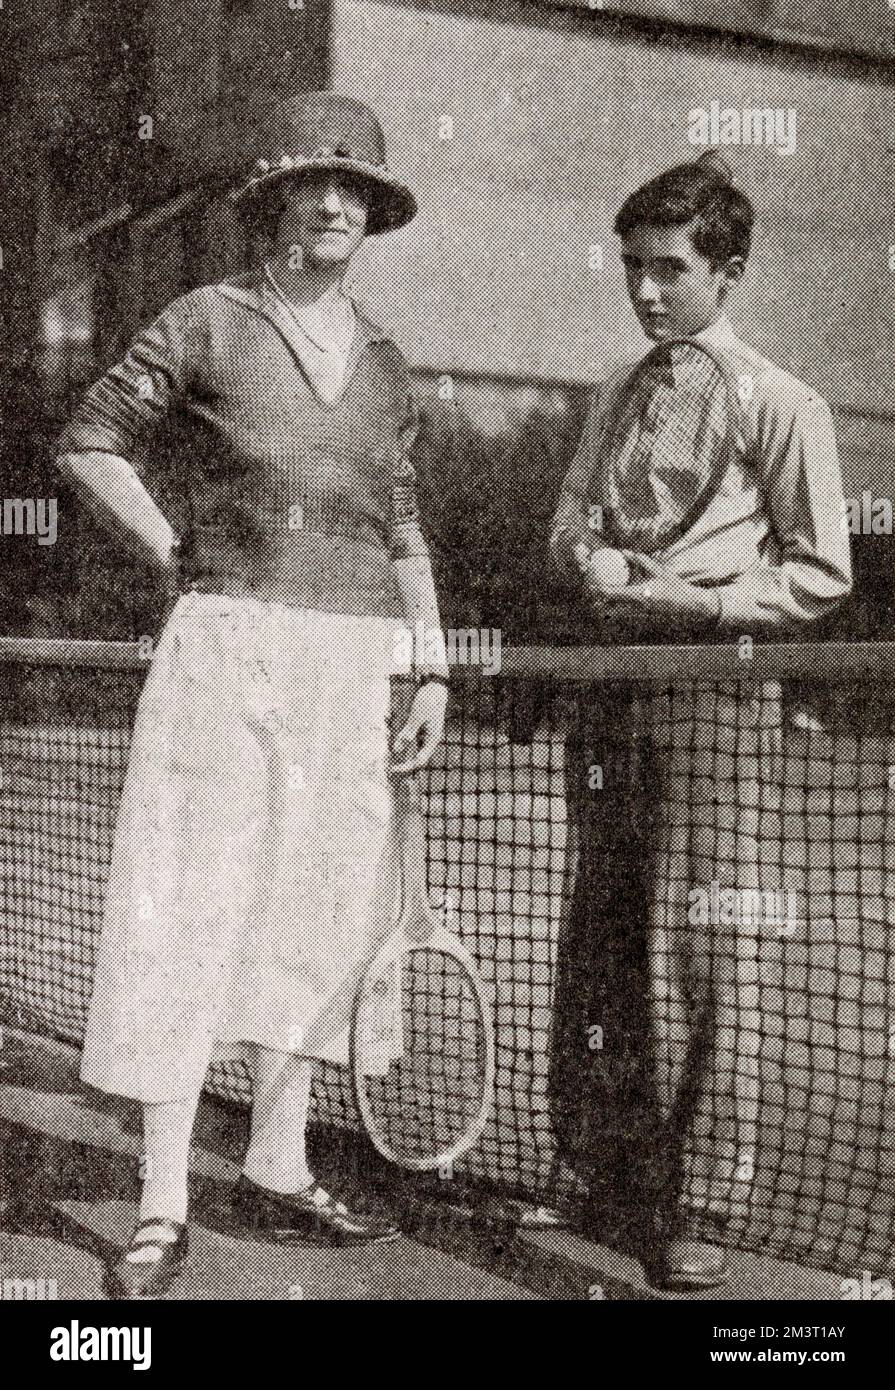 Lady Ennismore, formerly Freda Vanden-Bempde-Johnstone, pictured with her second son, the Hon. Richard Hare (1907-1966), on a tennis court, probably at Queen's Club. Stock Photo